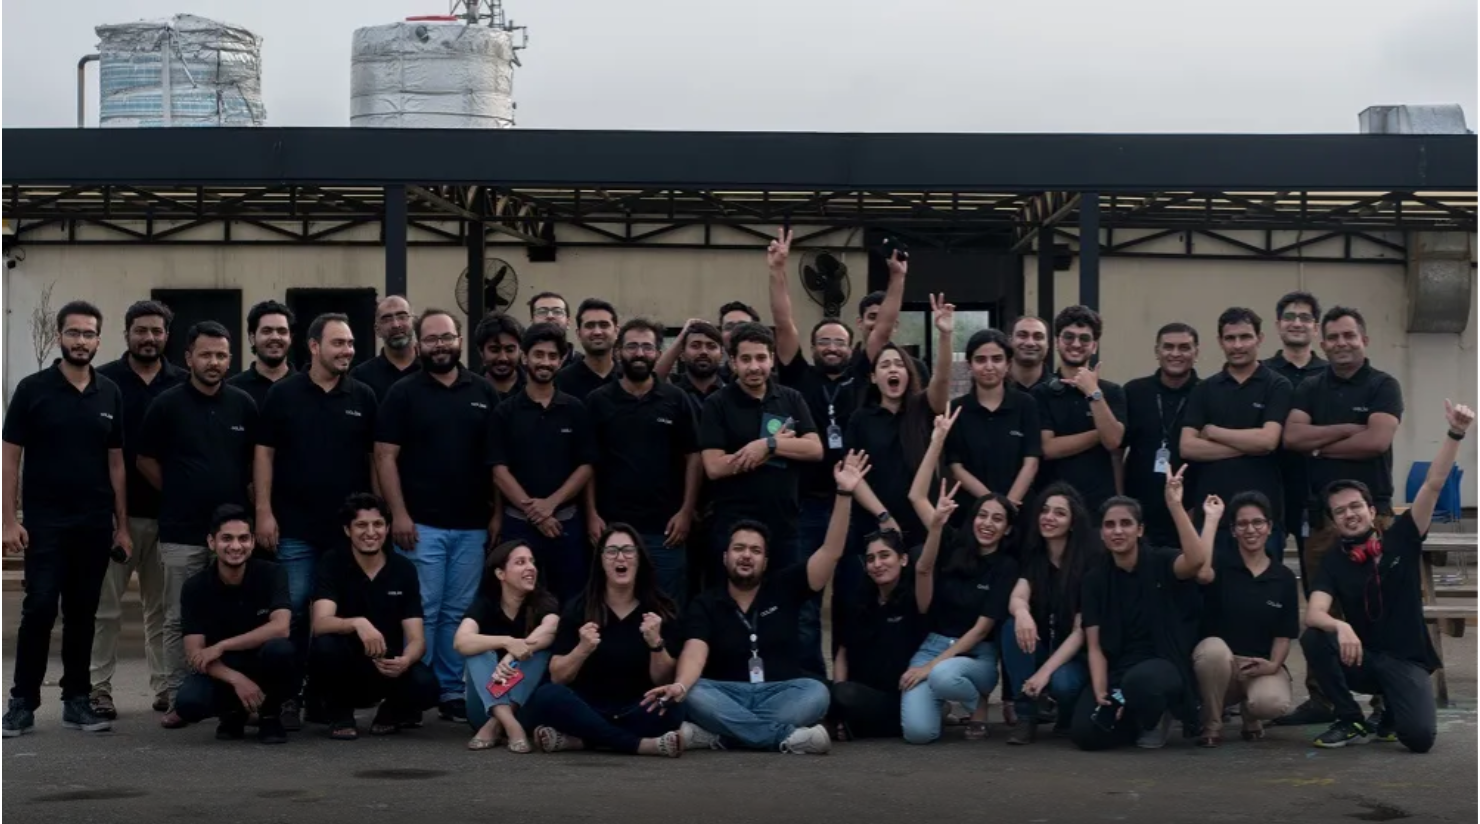 Pakistan’s Colabs wants to build a community of 100,000 entrepreneurs and freelancers